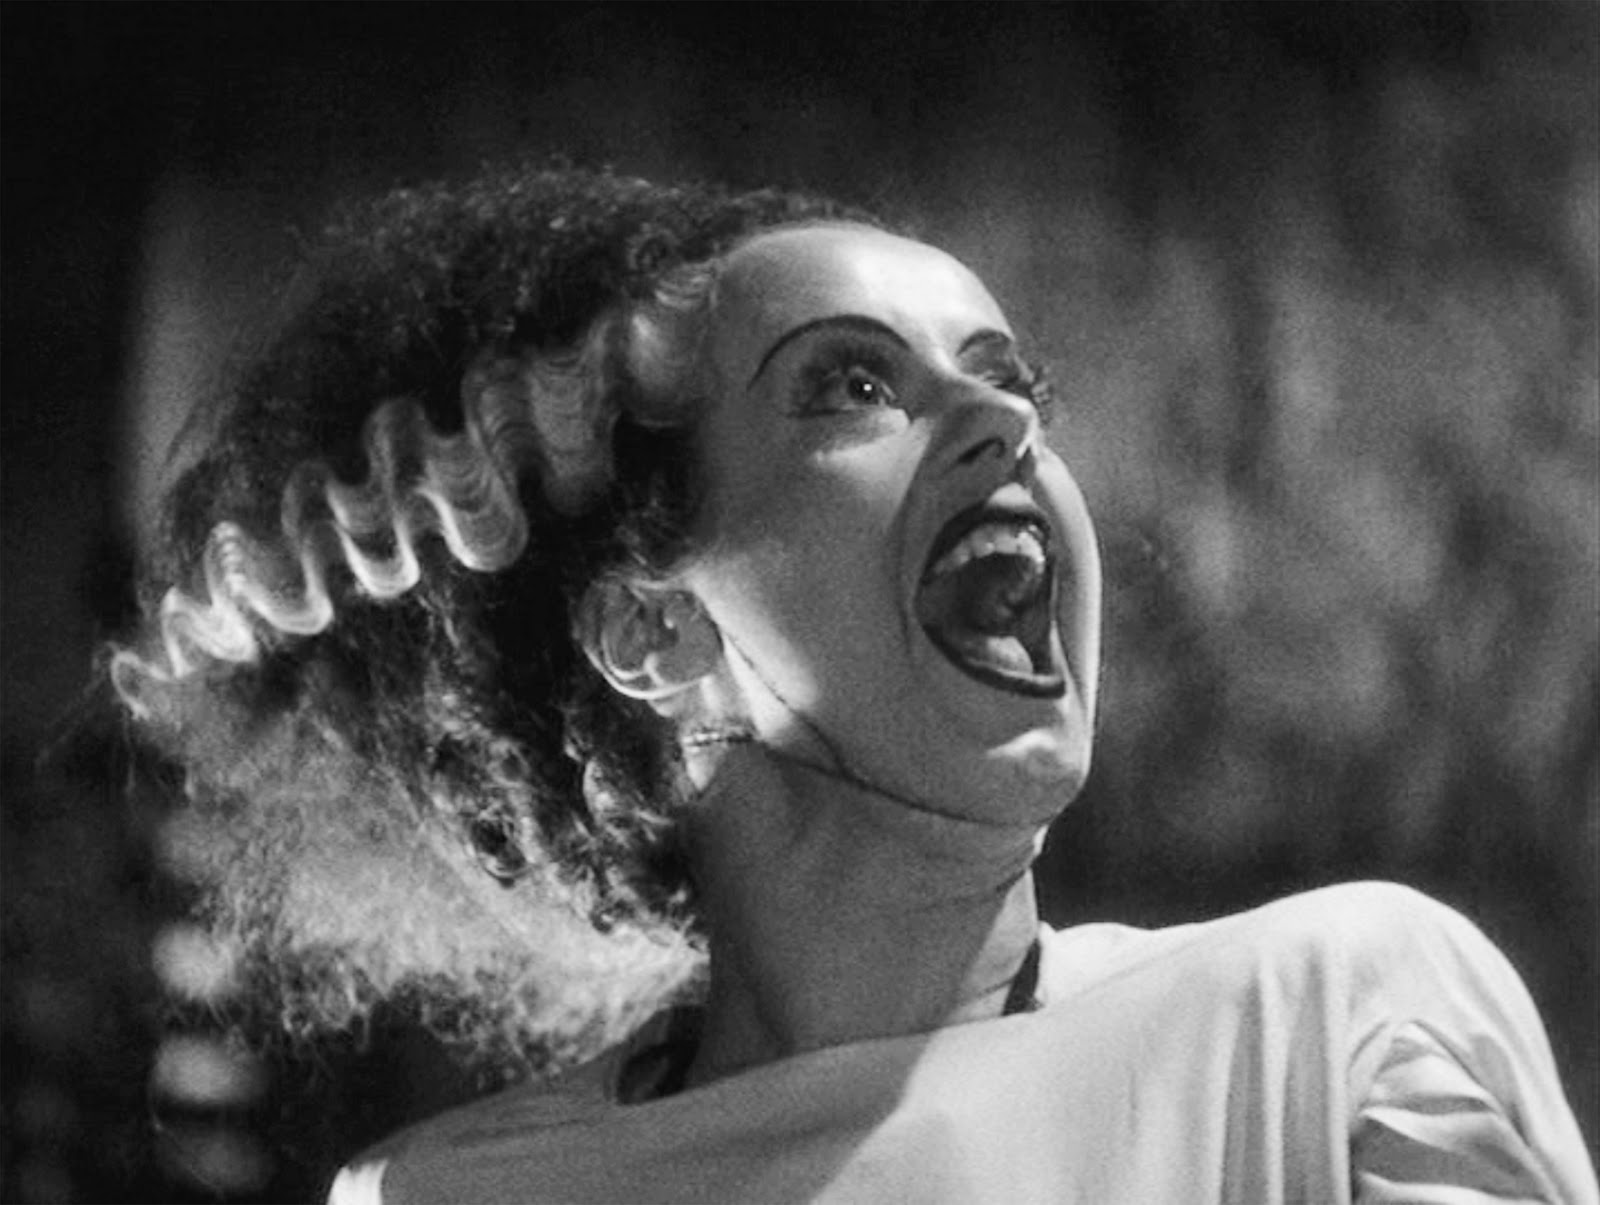 Bride Of Frankenstein Porn Movie - Universal Putting Classic Monster Movies Including 'Dracula' Up for Free  YouTube Streaming Outside the U.S. - Bloody Disgusting